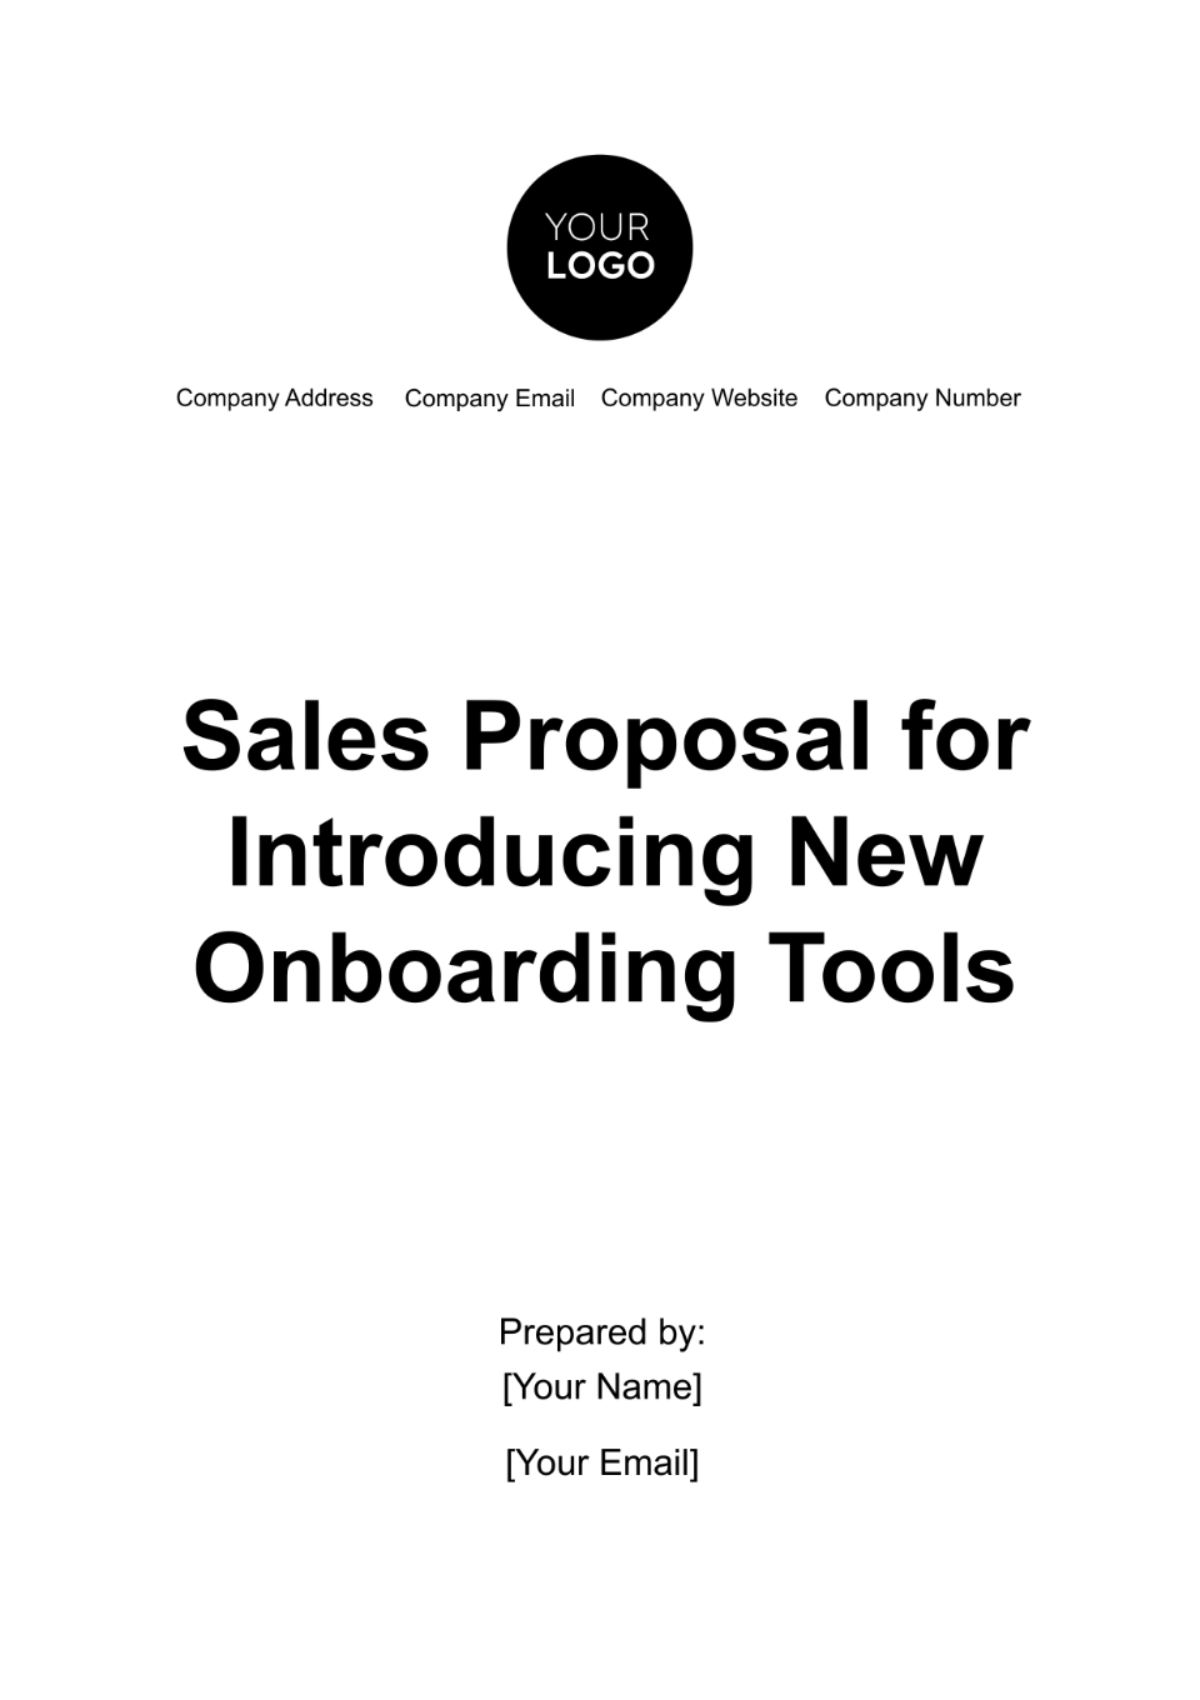 Free Sales Proposal for Introducing New Onboarding Tools Template